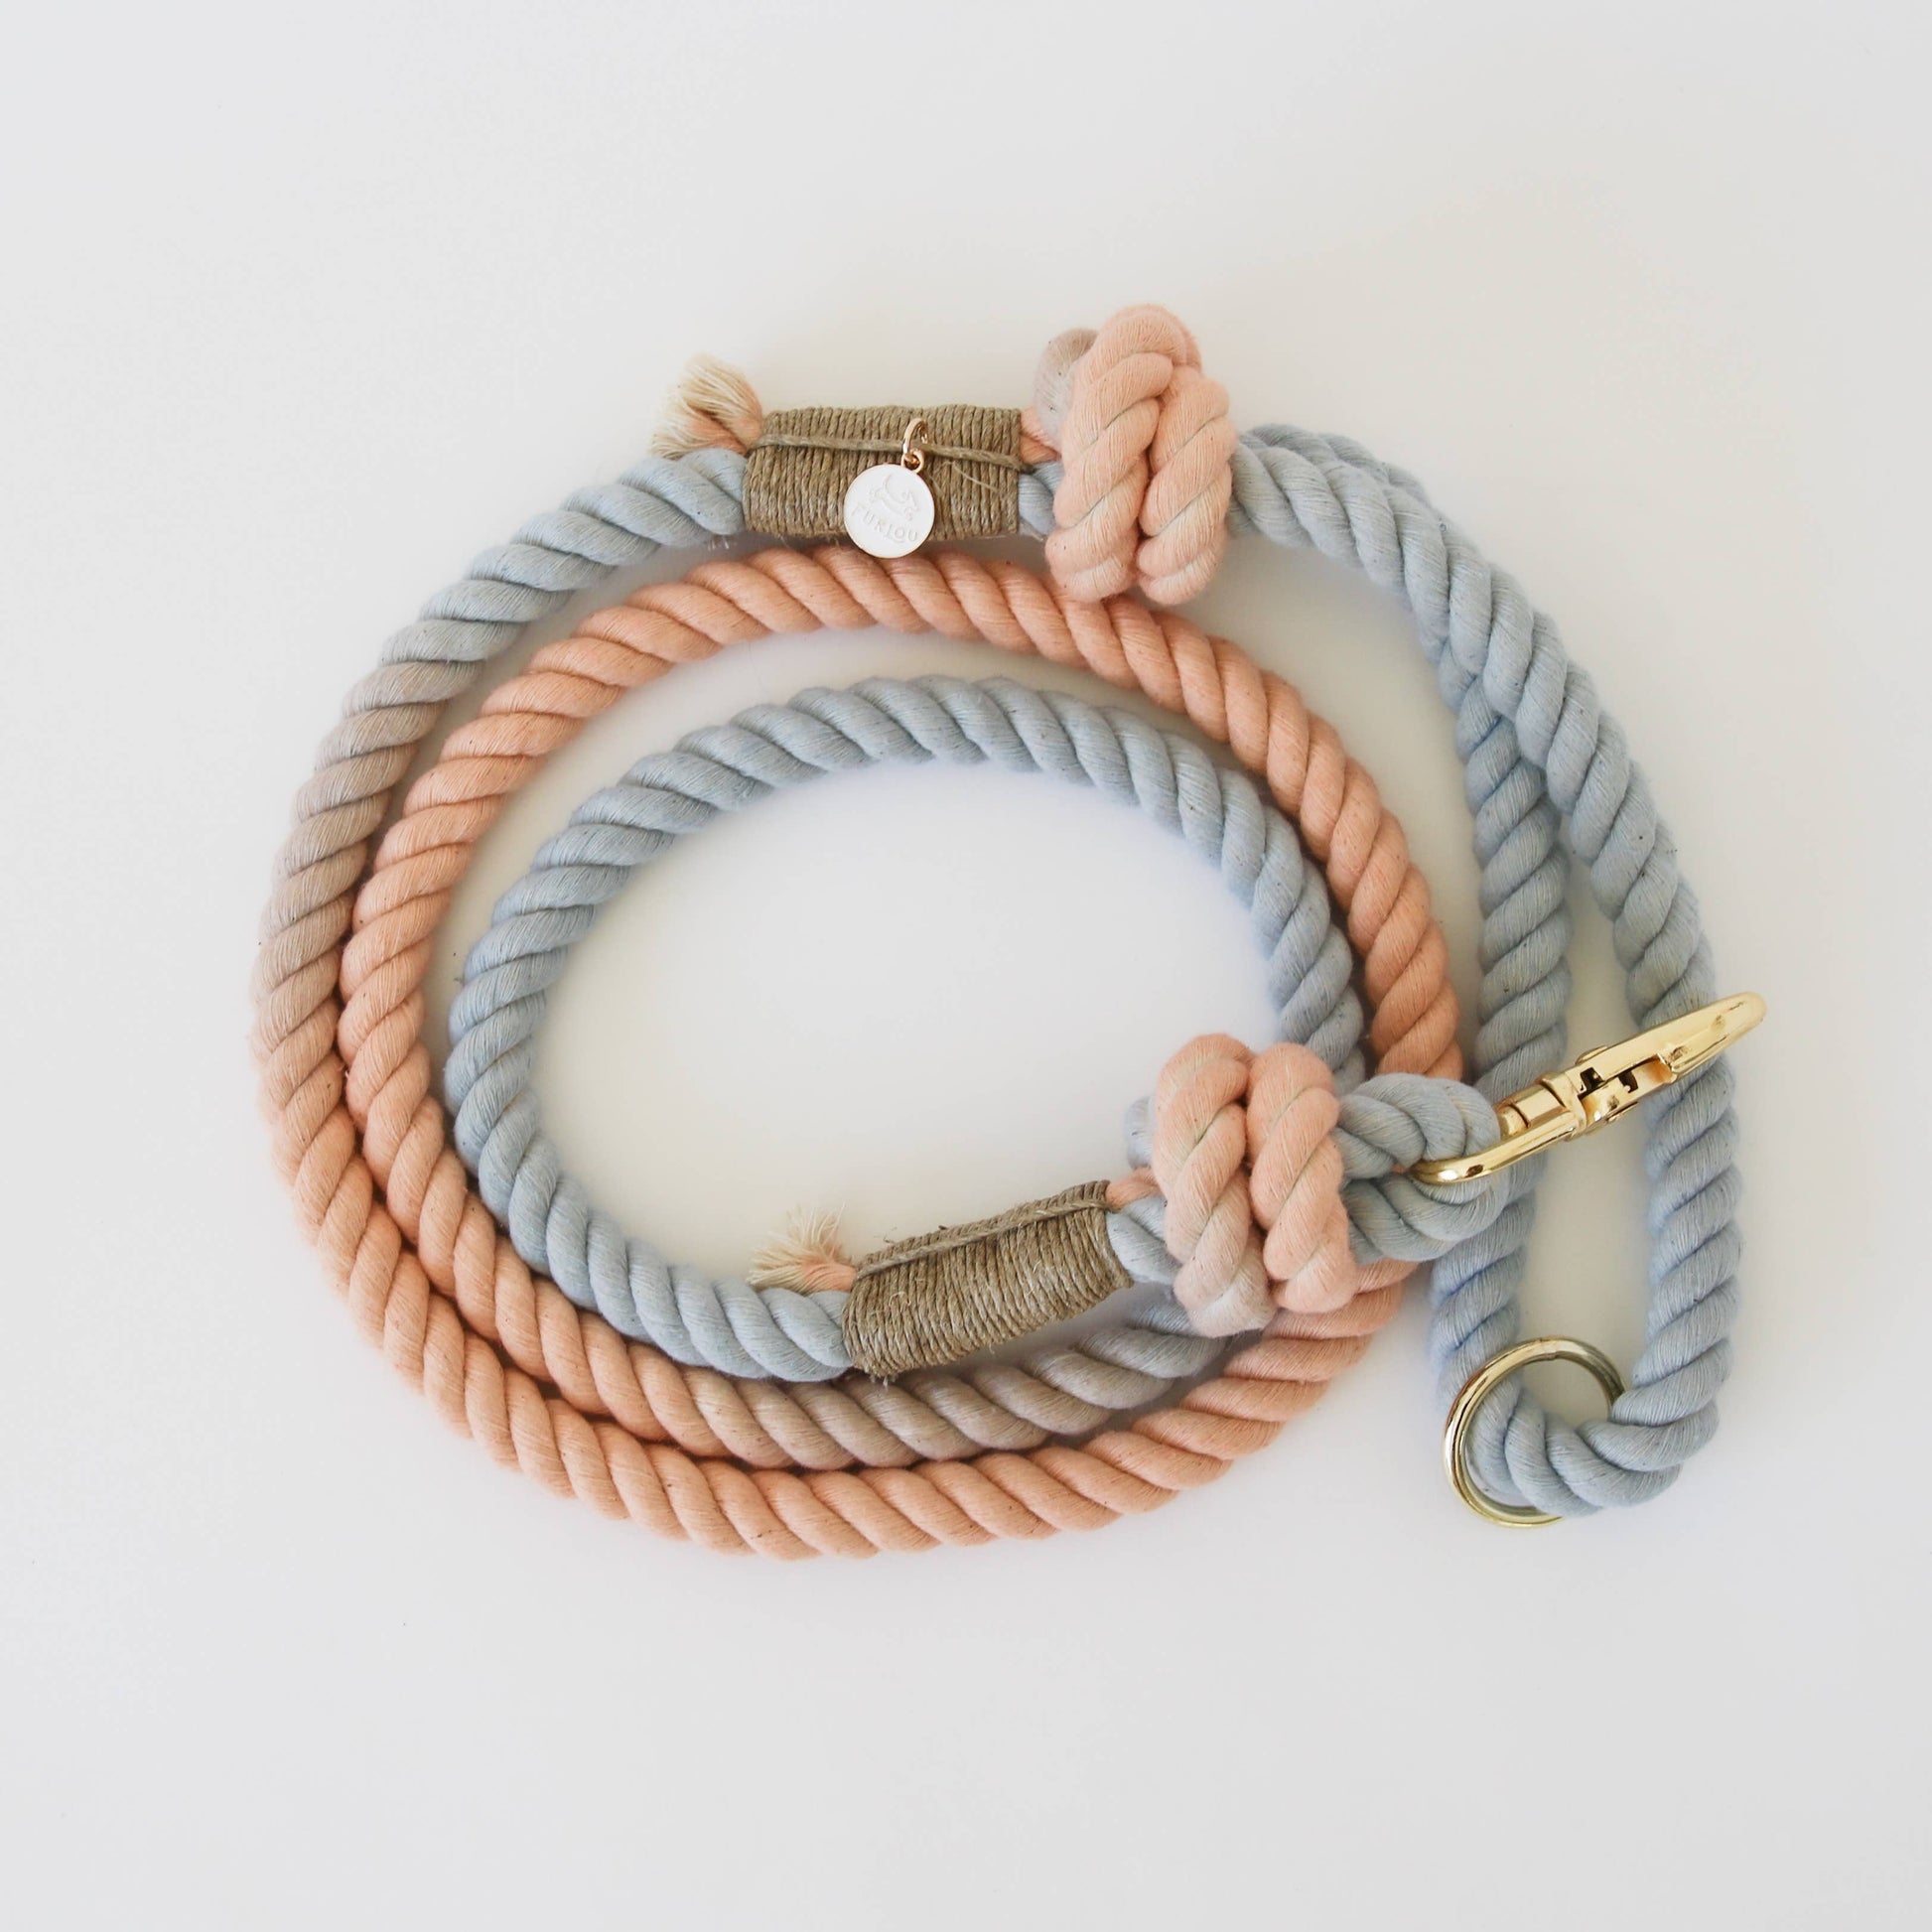 'Sunset Sherbet' - Dog Rope Leash - The Crowd Went Wild